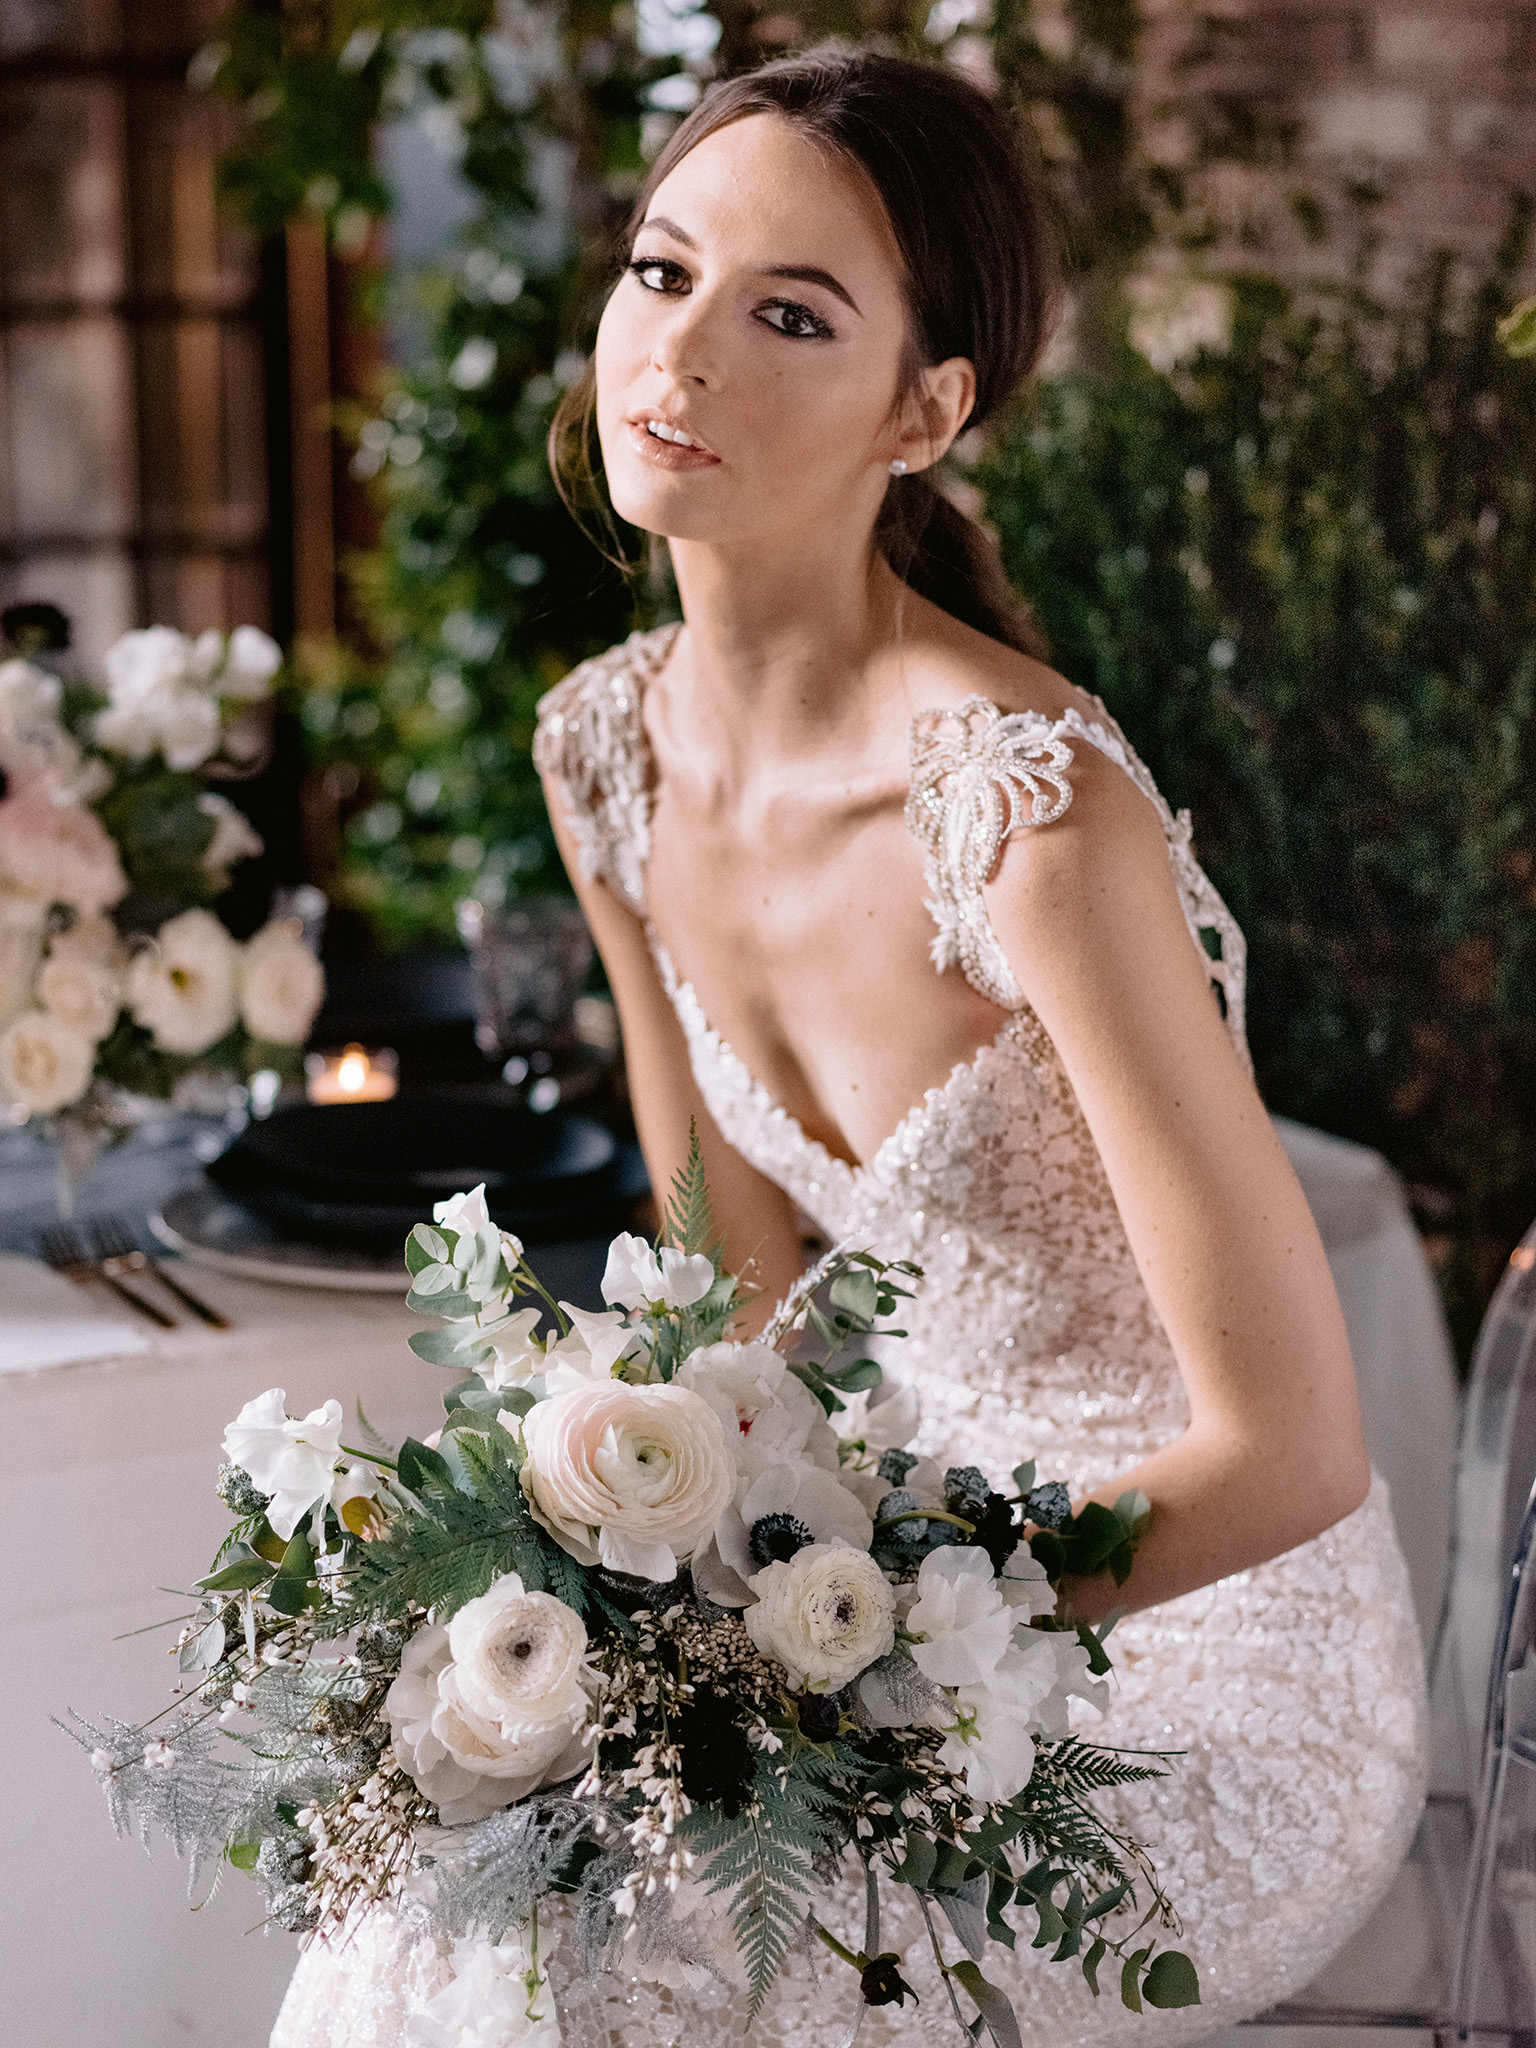 Chic bride with delicate white wedding bouquet